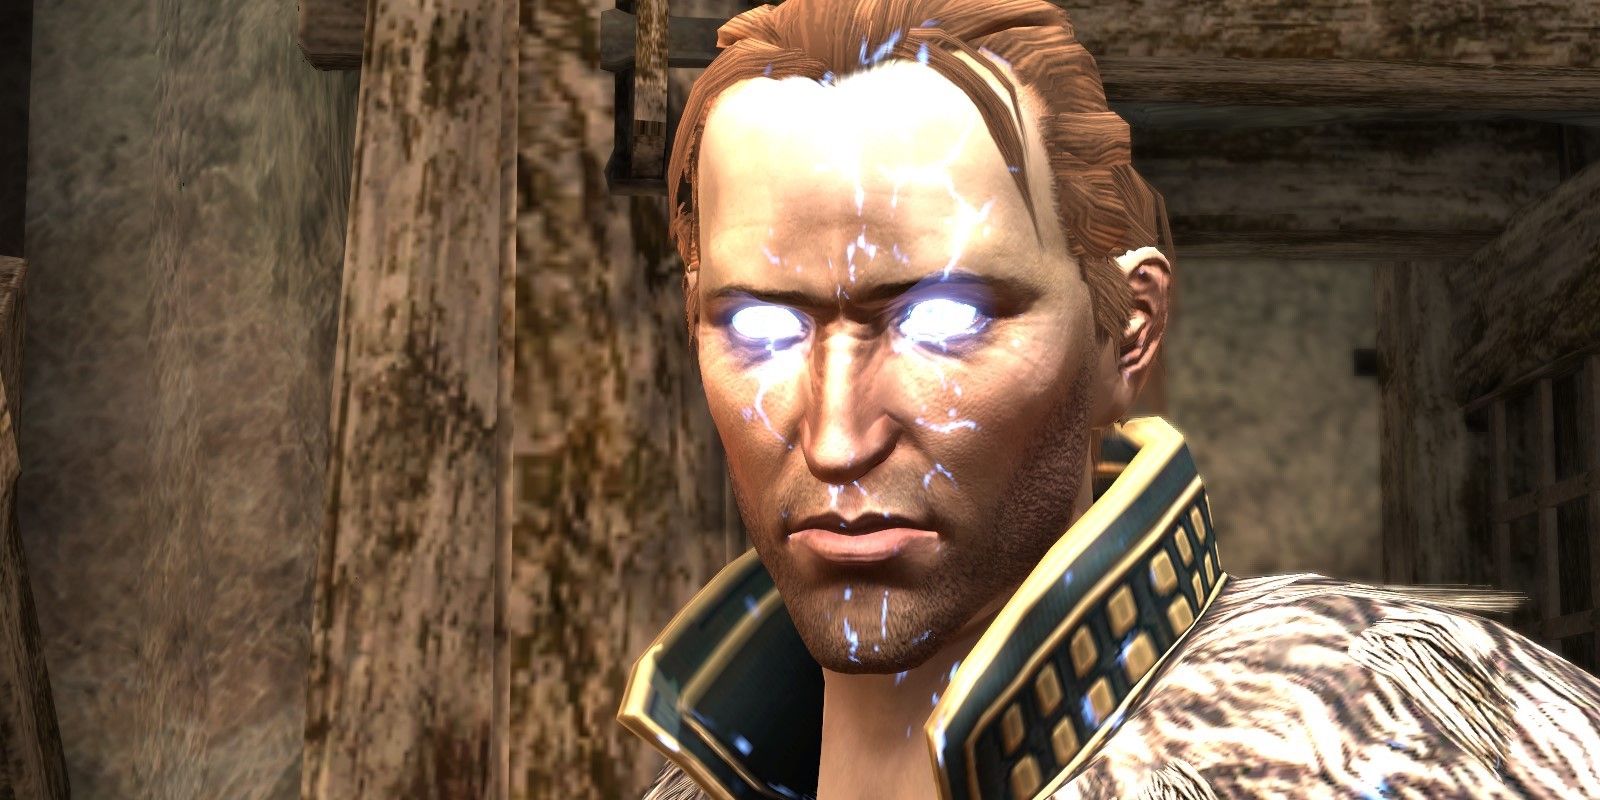 Anders fusing with Justice in Dragon Age 2